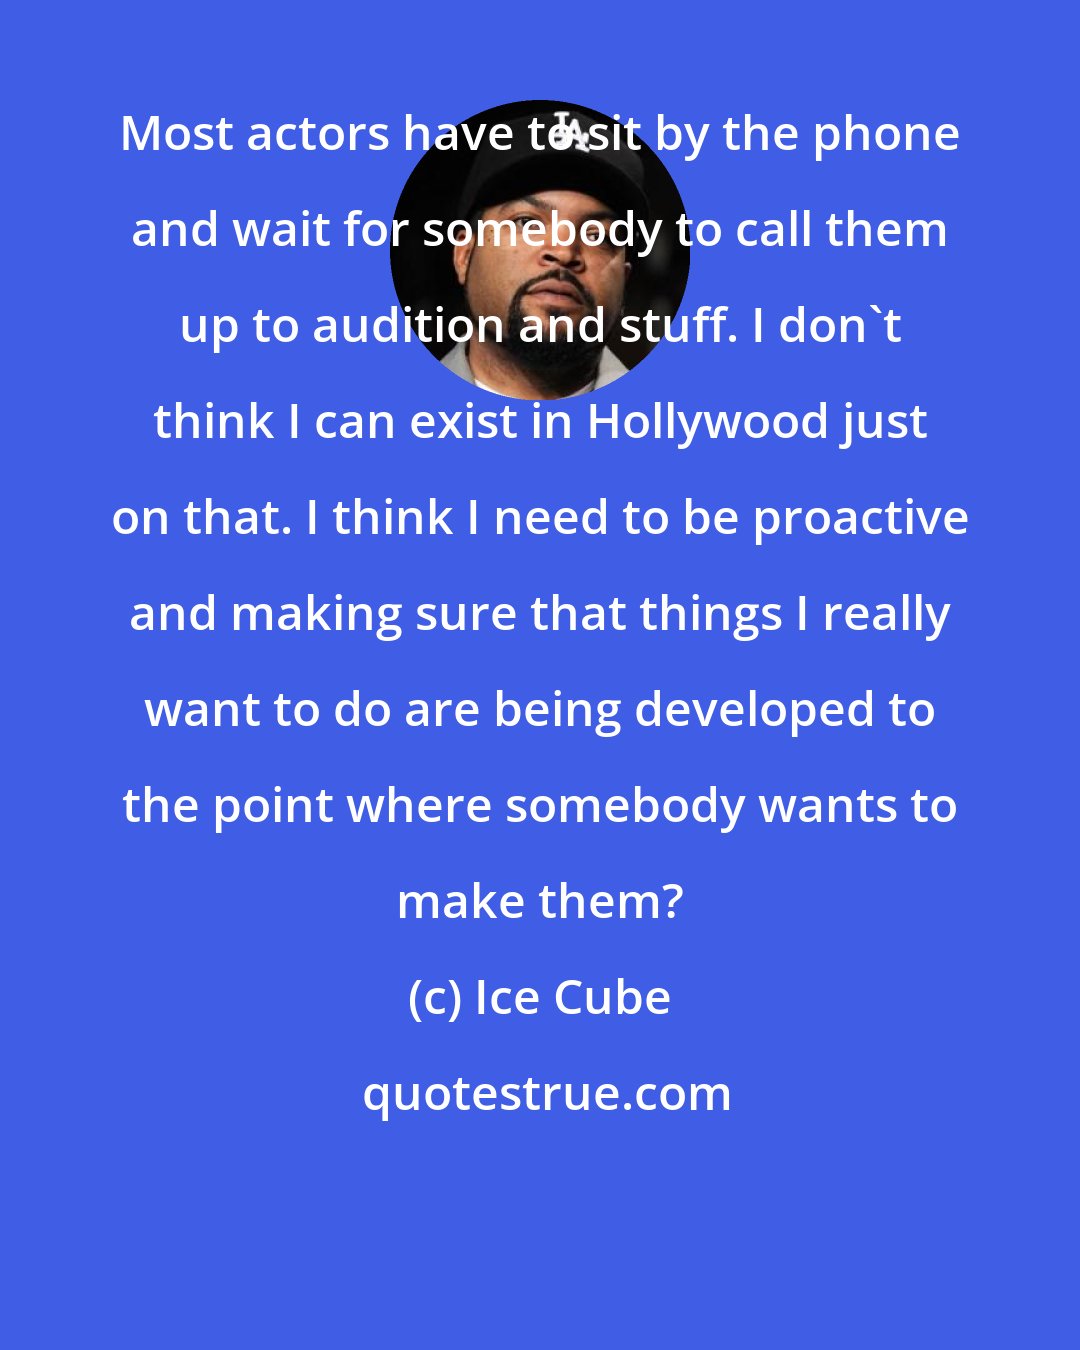 Ice Cube: Most actors have to sit by the phone and wait for somebody to call them up to audition and stuff. I don't think I can exist in Hollywood just on that. I think I need to be proactive and making sure that things I really want to do are being developed to the point where somebody wants to make them?